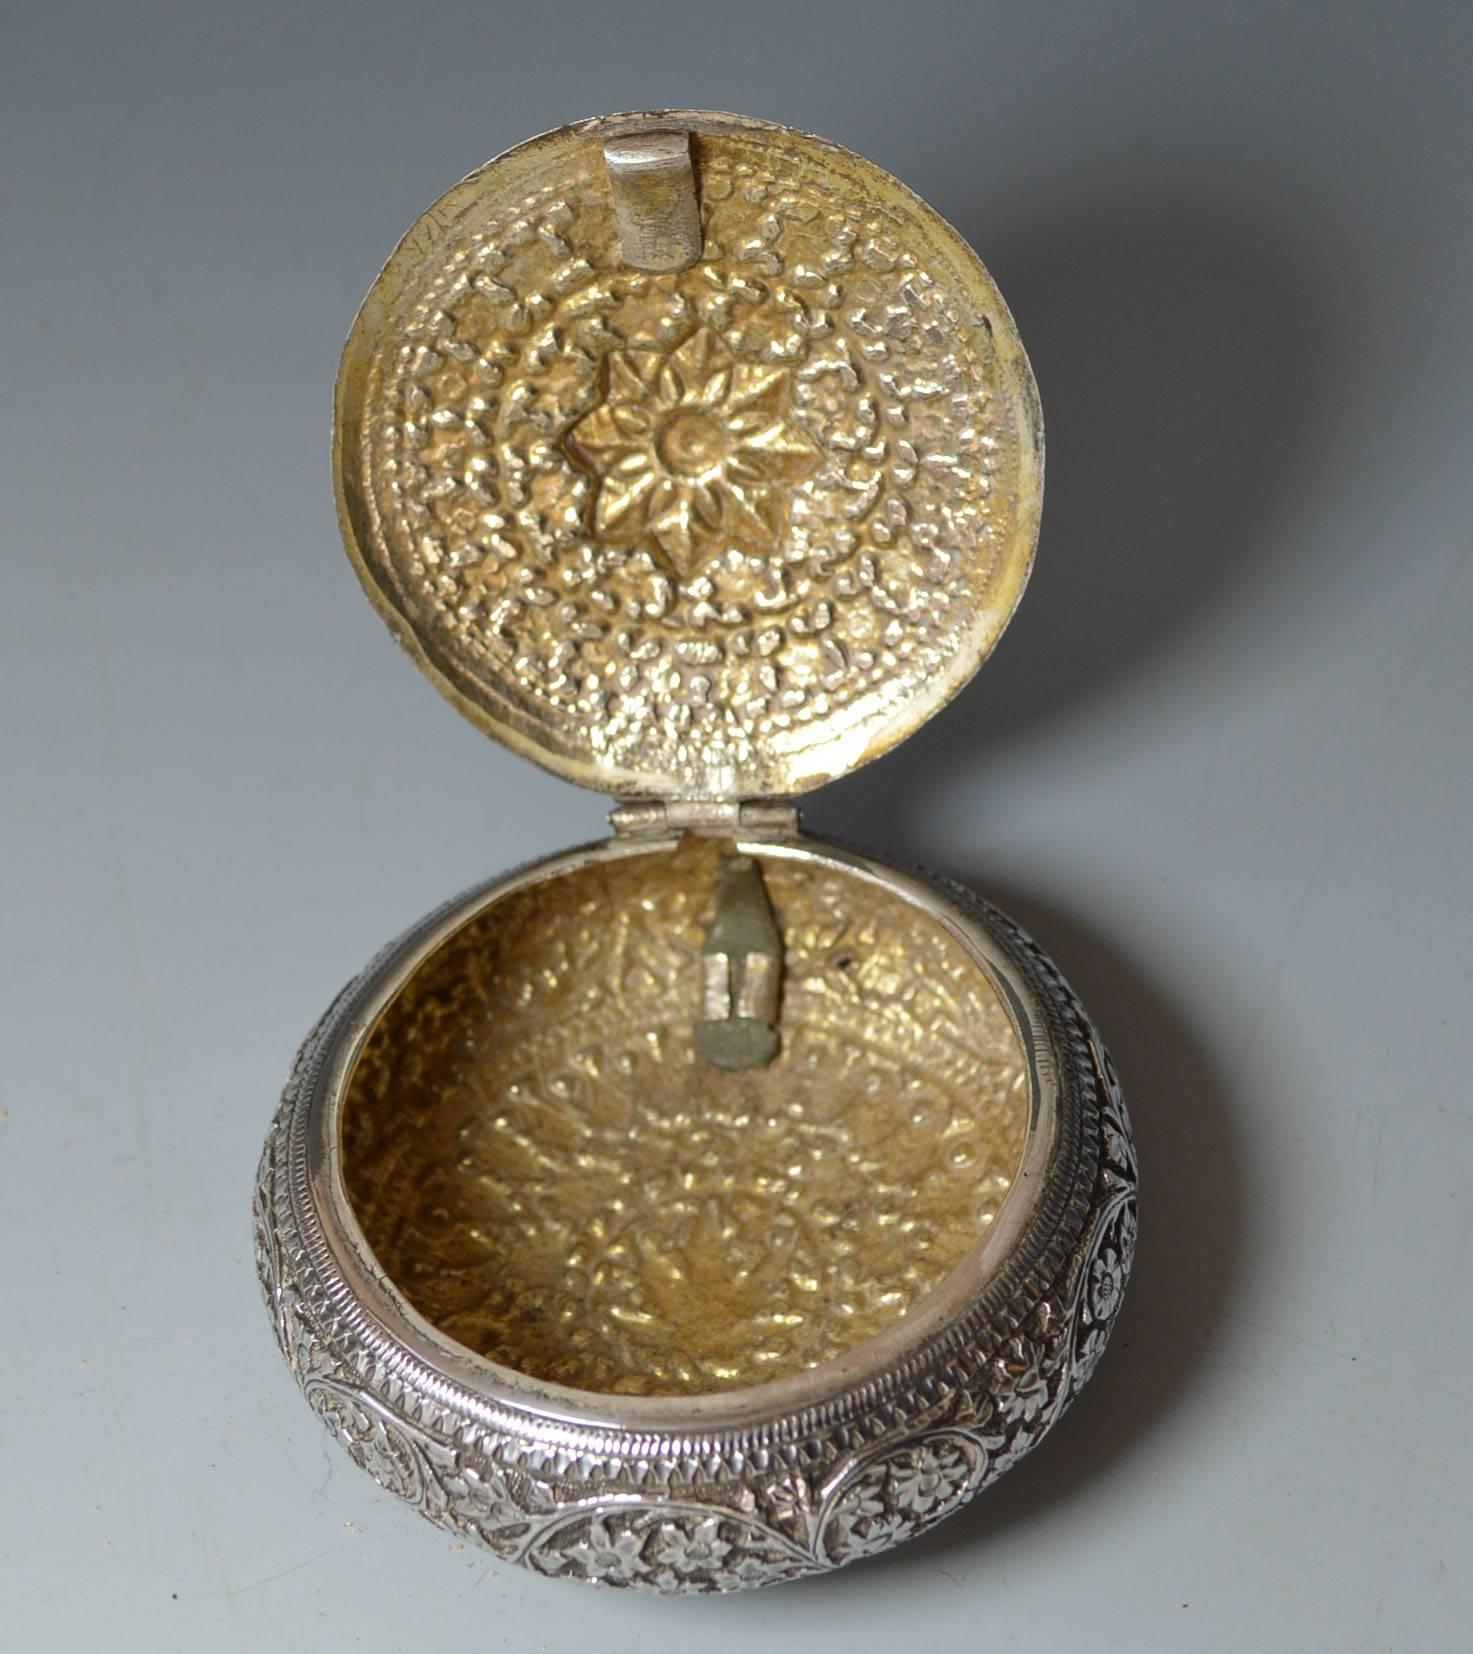 Fine old vintage Indian Kutch silver snuff box
Kutch, Gujarat, India
Very fine scroll work with gilt interior
High grade silver.
Early 20th century.
Squeeze to open
Condition: Fine.
 




